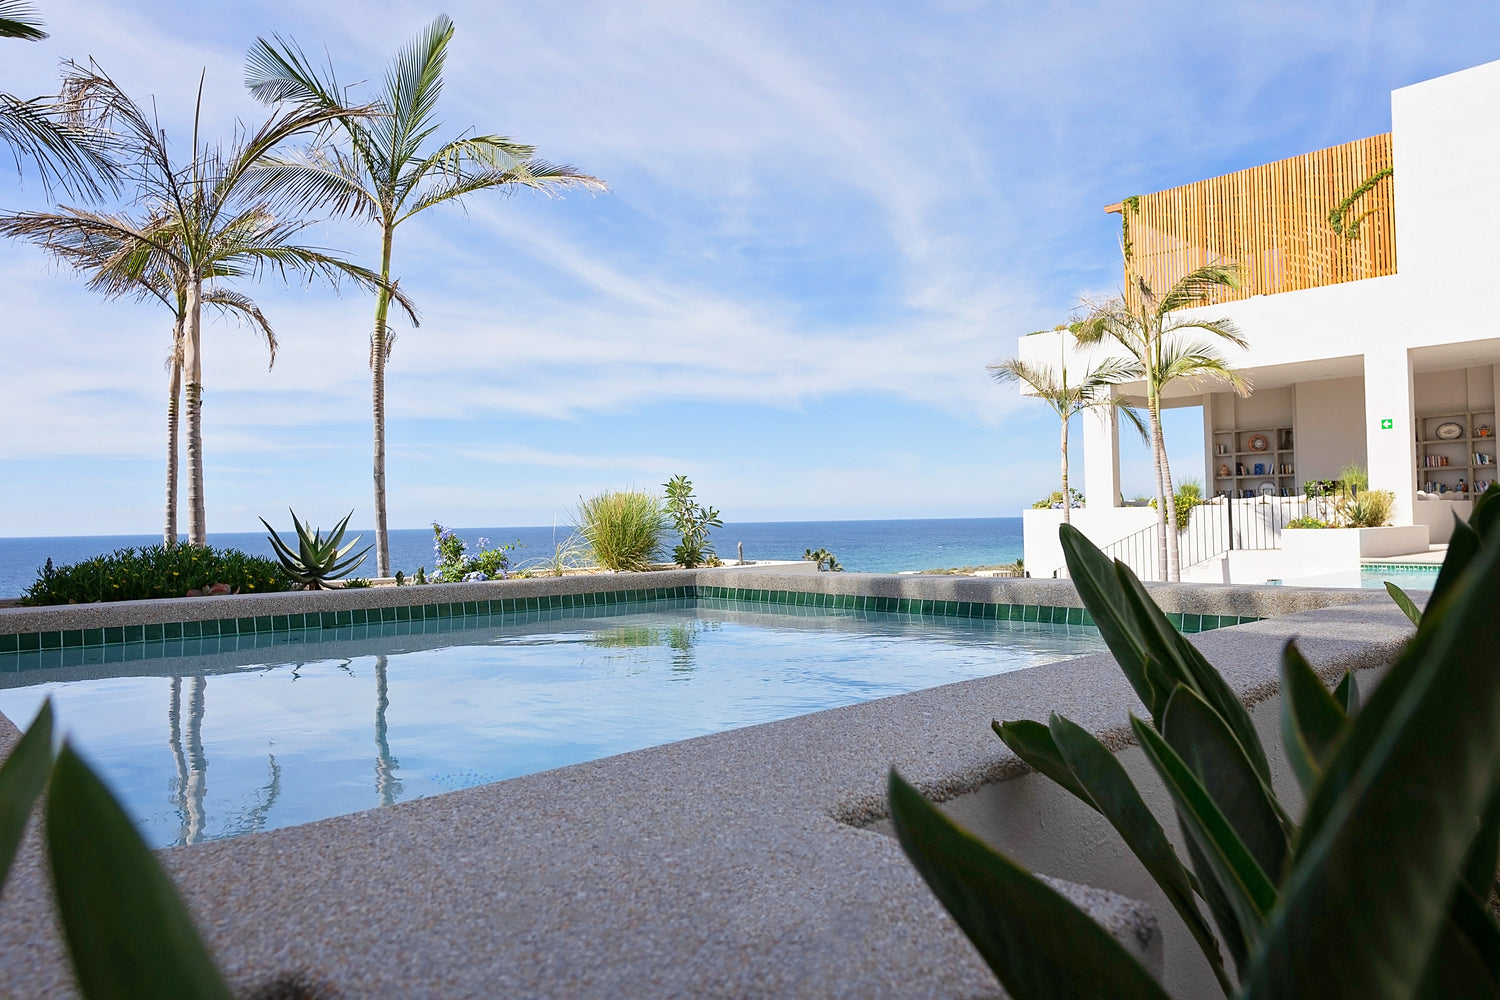 Image of the pool at the luxury accommodations for the soulside spring renewal and recovery yoga retreat in baja california mexico